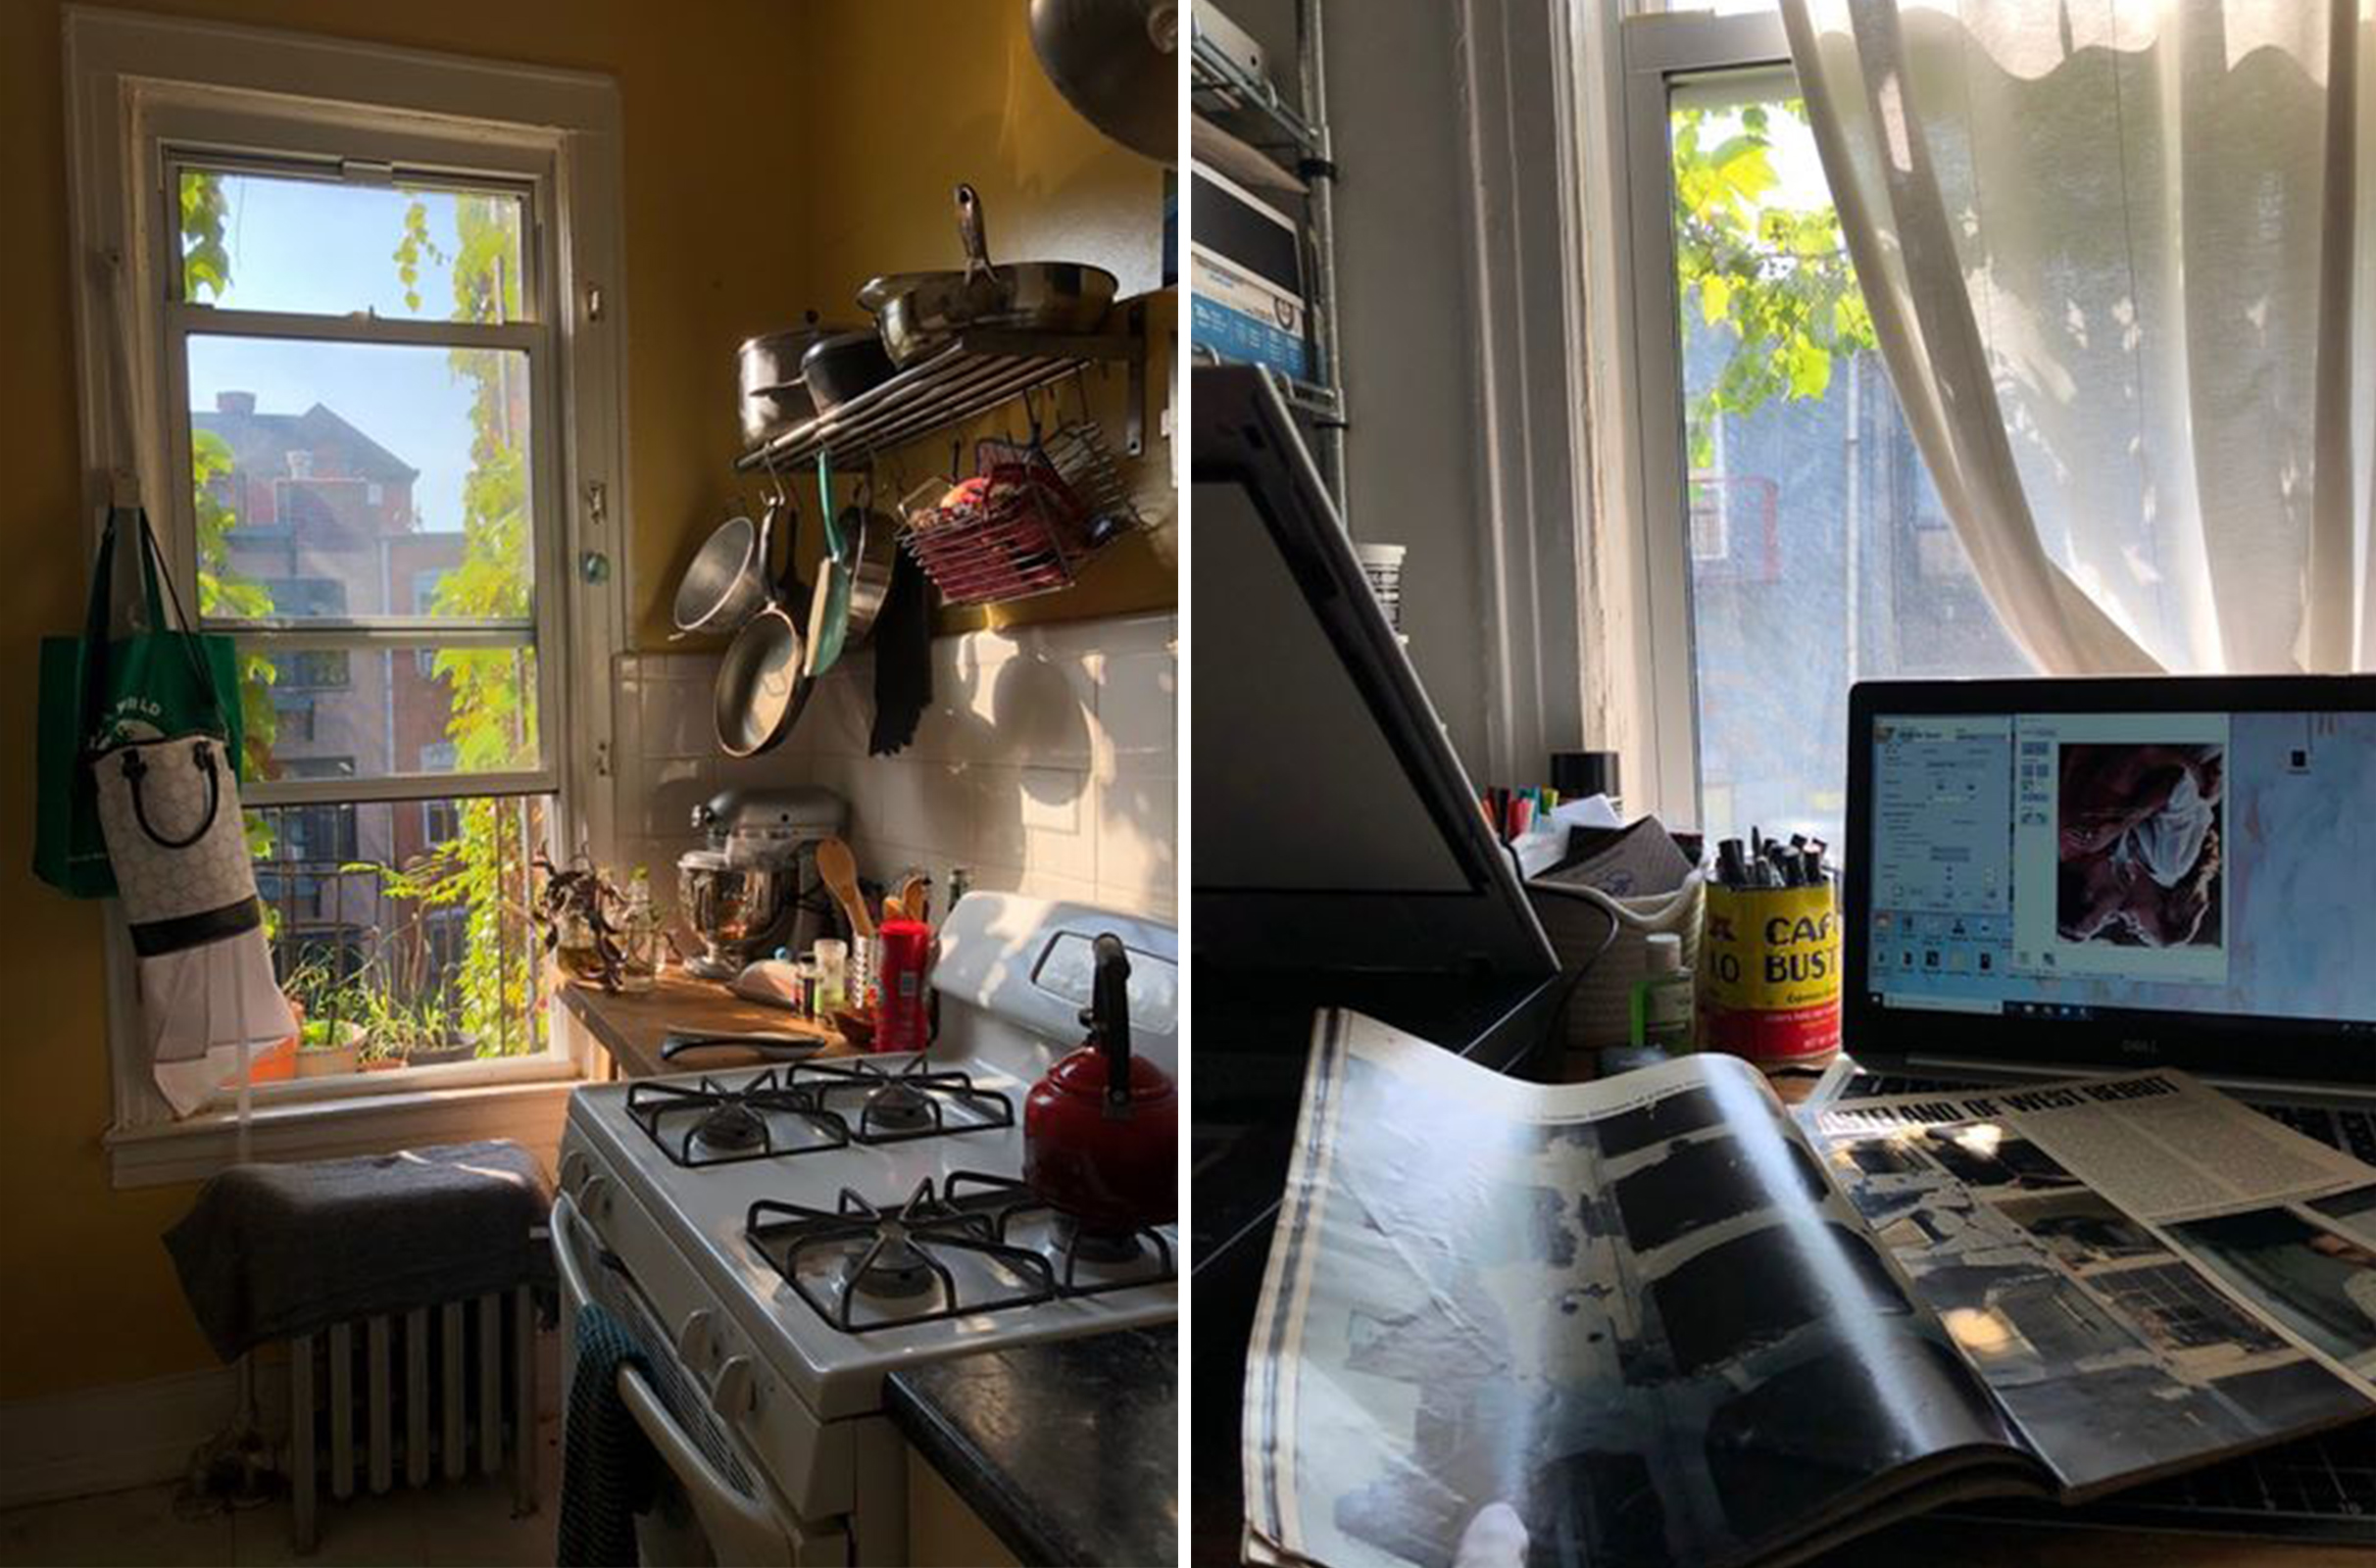 Sydney Ellison, a student at Pratt Institute in New York City, has been living in Brooklyn and studying remotely while classes remain virtual this fall (Courtesy Sydney Ellison)